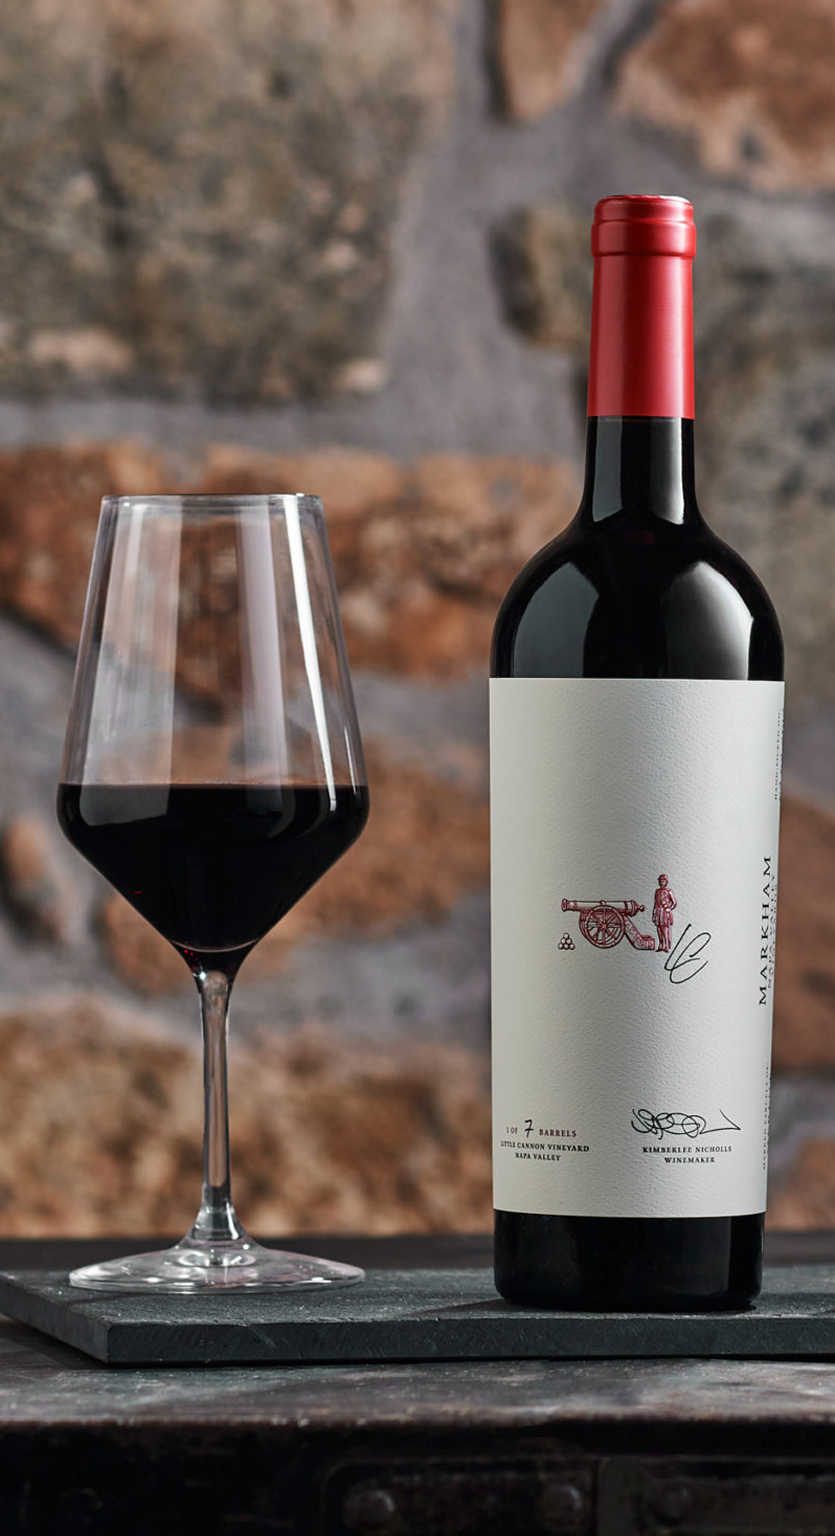 Bottle of Marked Parcels Cabernet next to a red wine glass with stone background